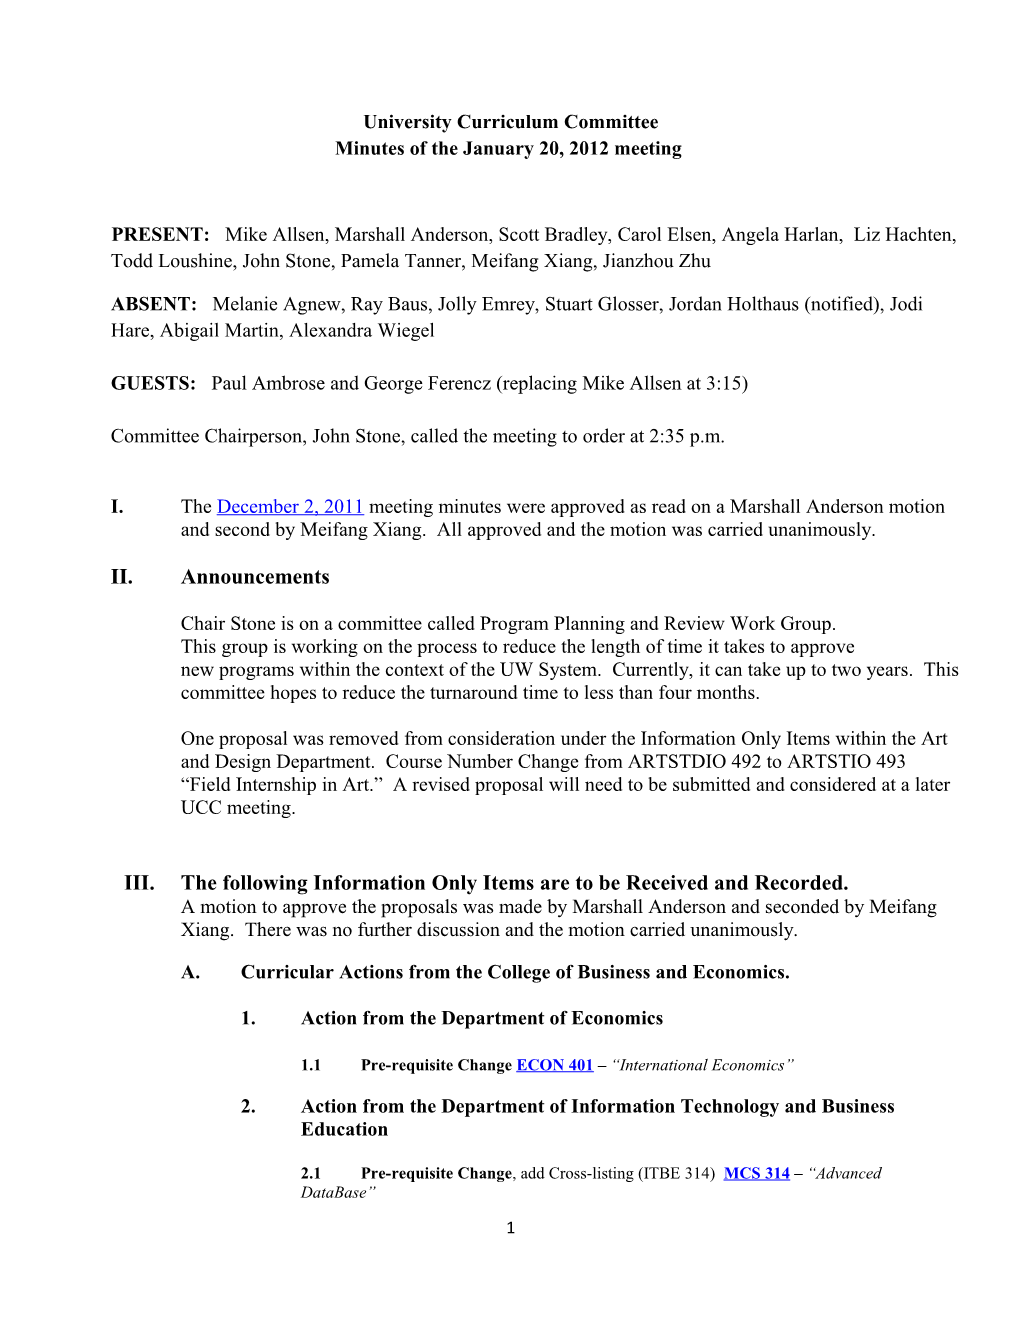 University Curriculum Committee Minutes of the January 20, 2012 Meeting